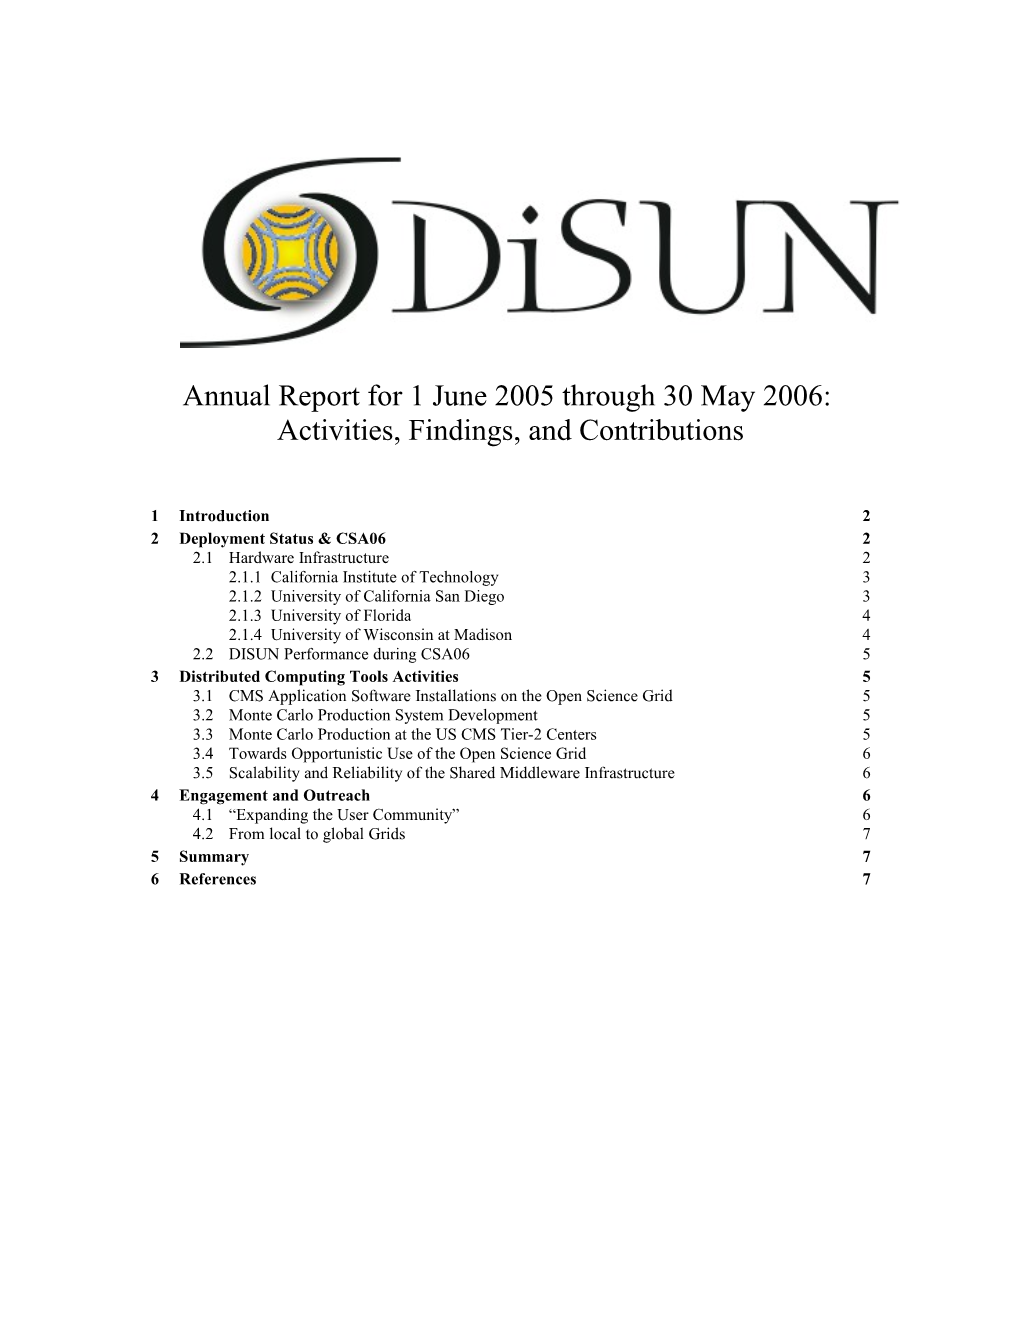 Annual Report for 1 June 2005 Through 30 May 2006